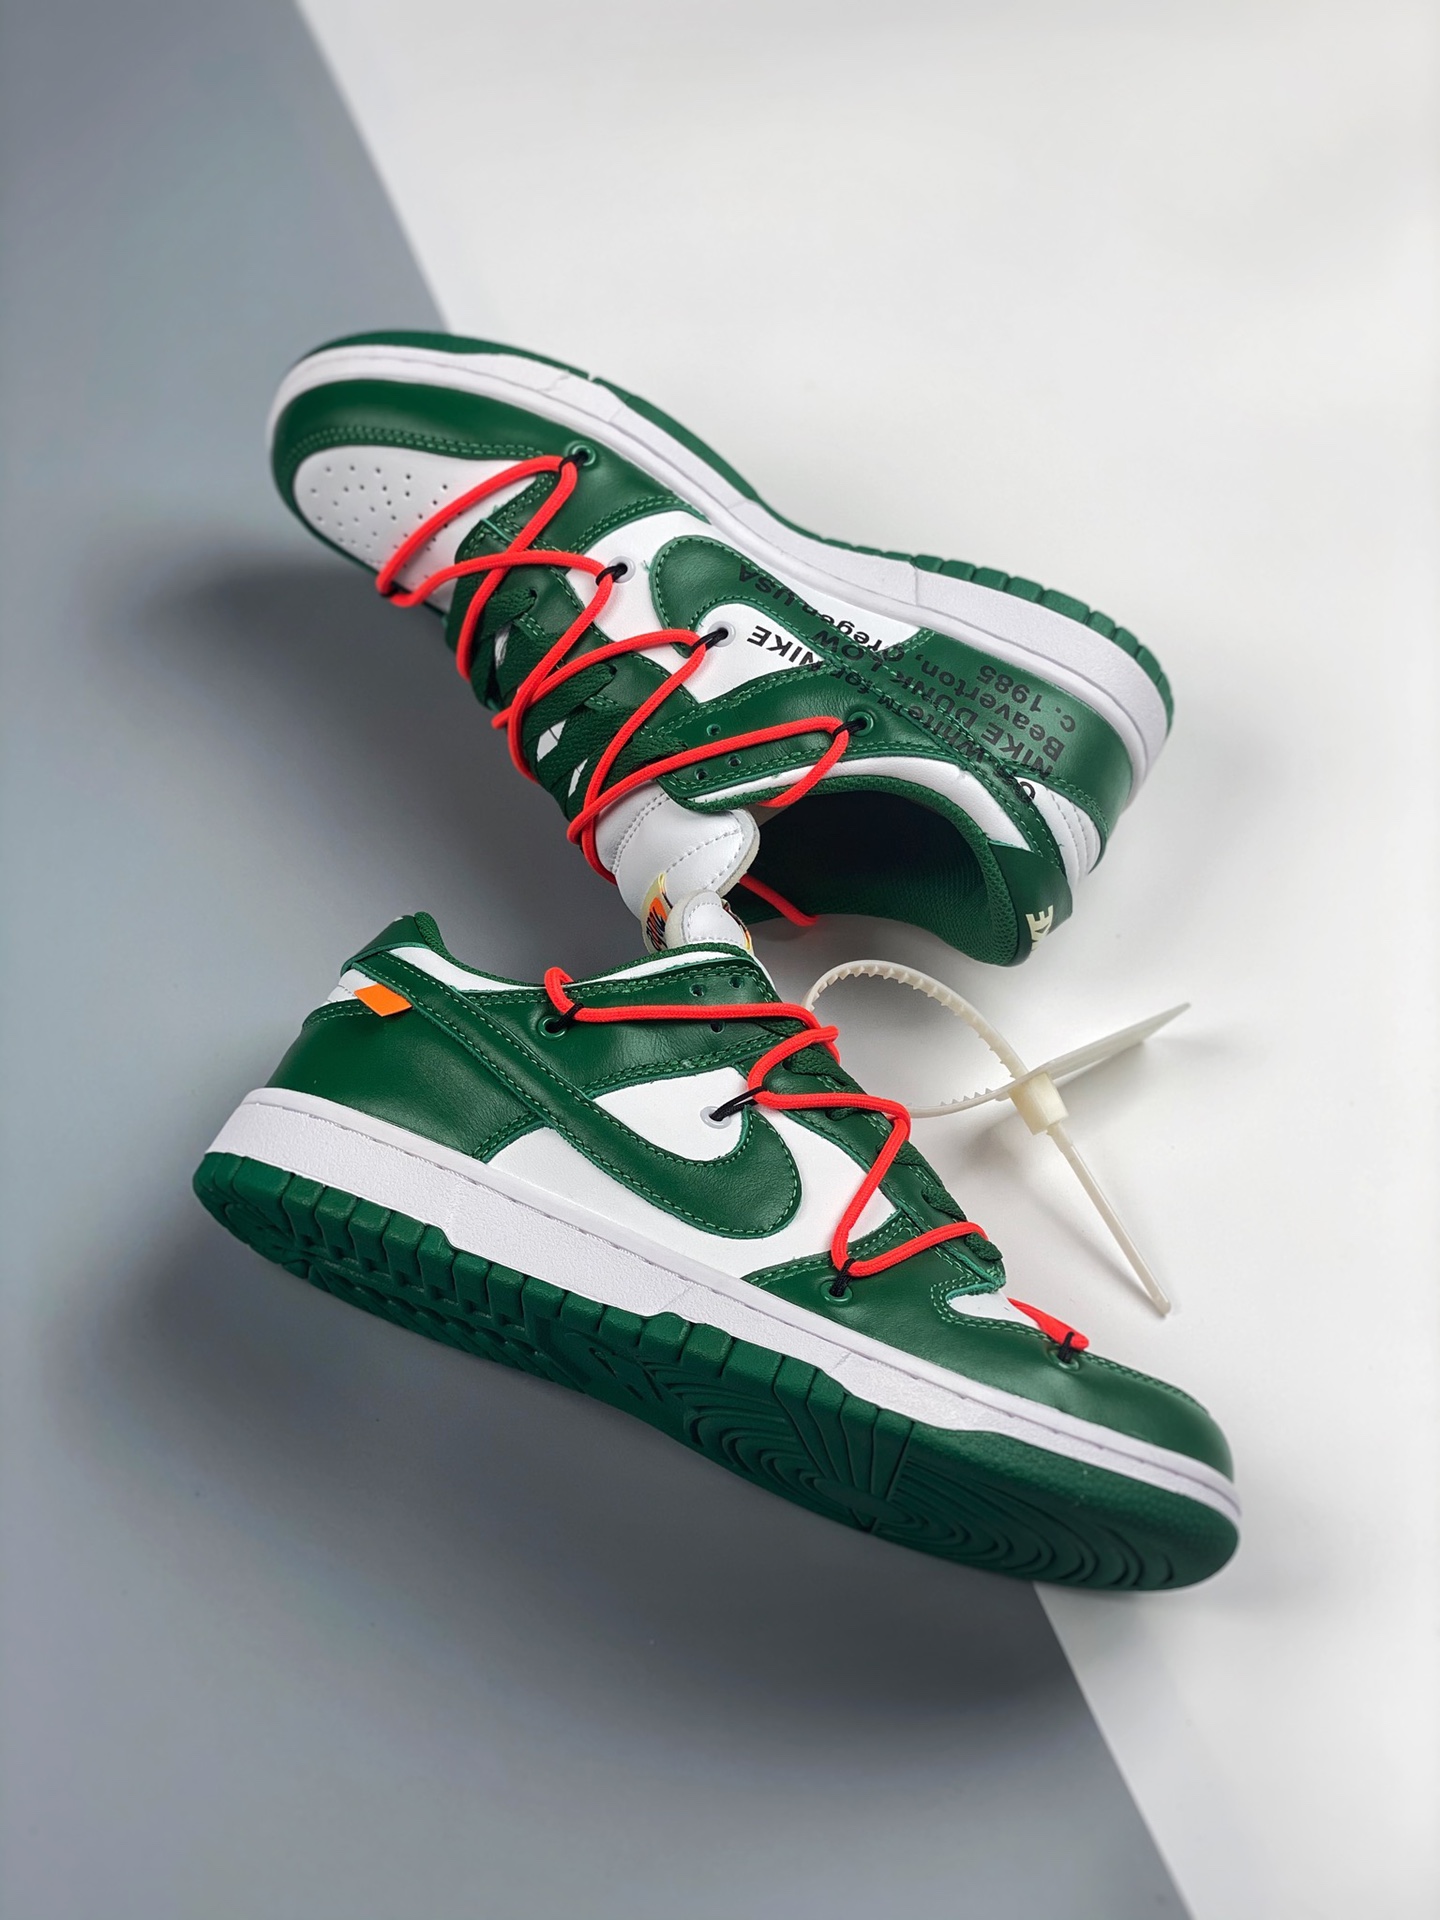 Off-White x Nike Dunk Low “Pine Green” CT0856-100 For Sale – Sneaker Hello